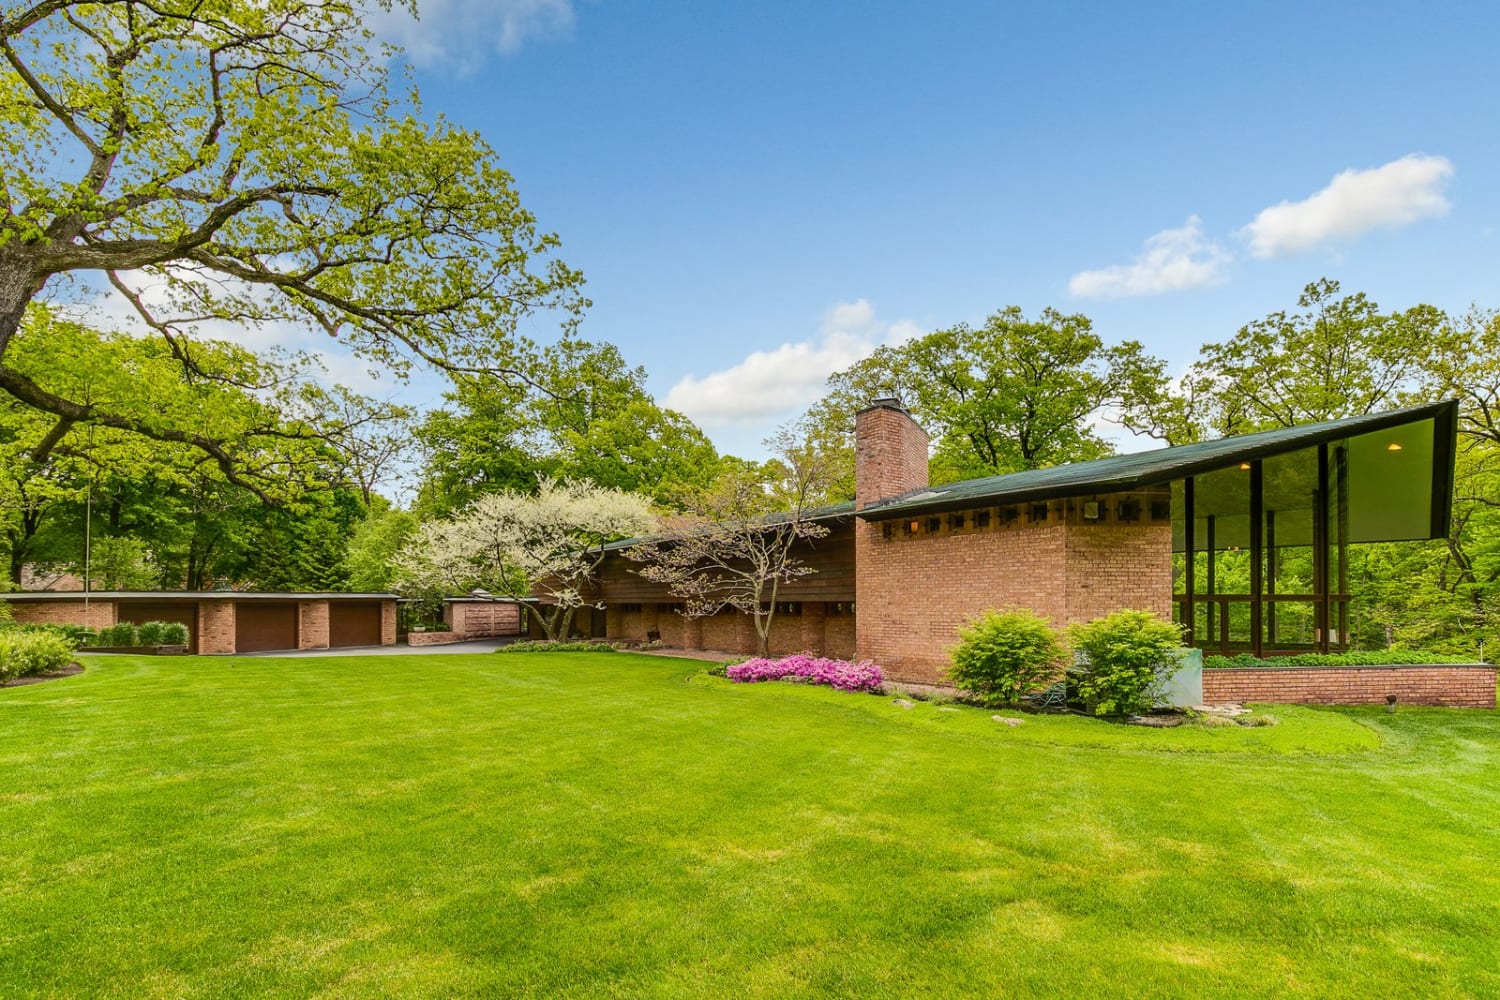 The Charles F. Glore House by Frank Lloyd Wright